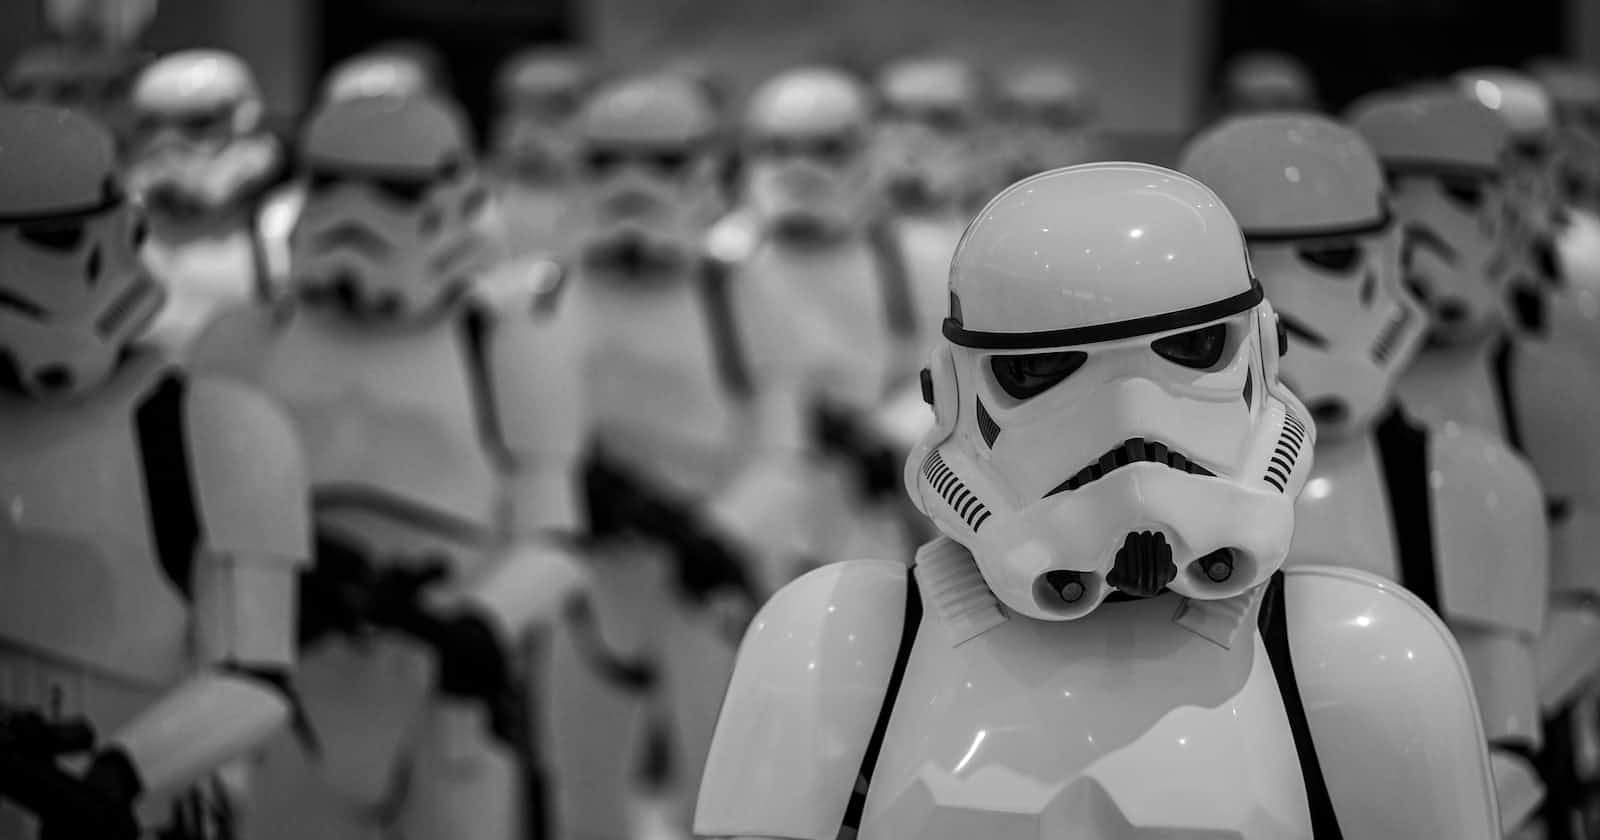 Detecting Emotions in Star Wars using AI